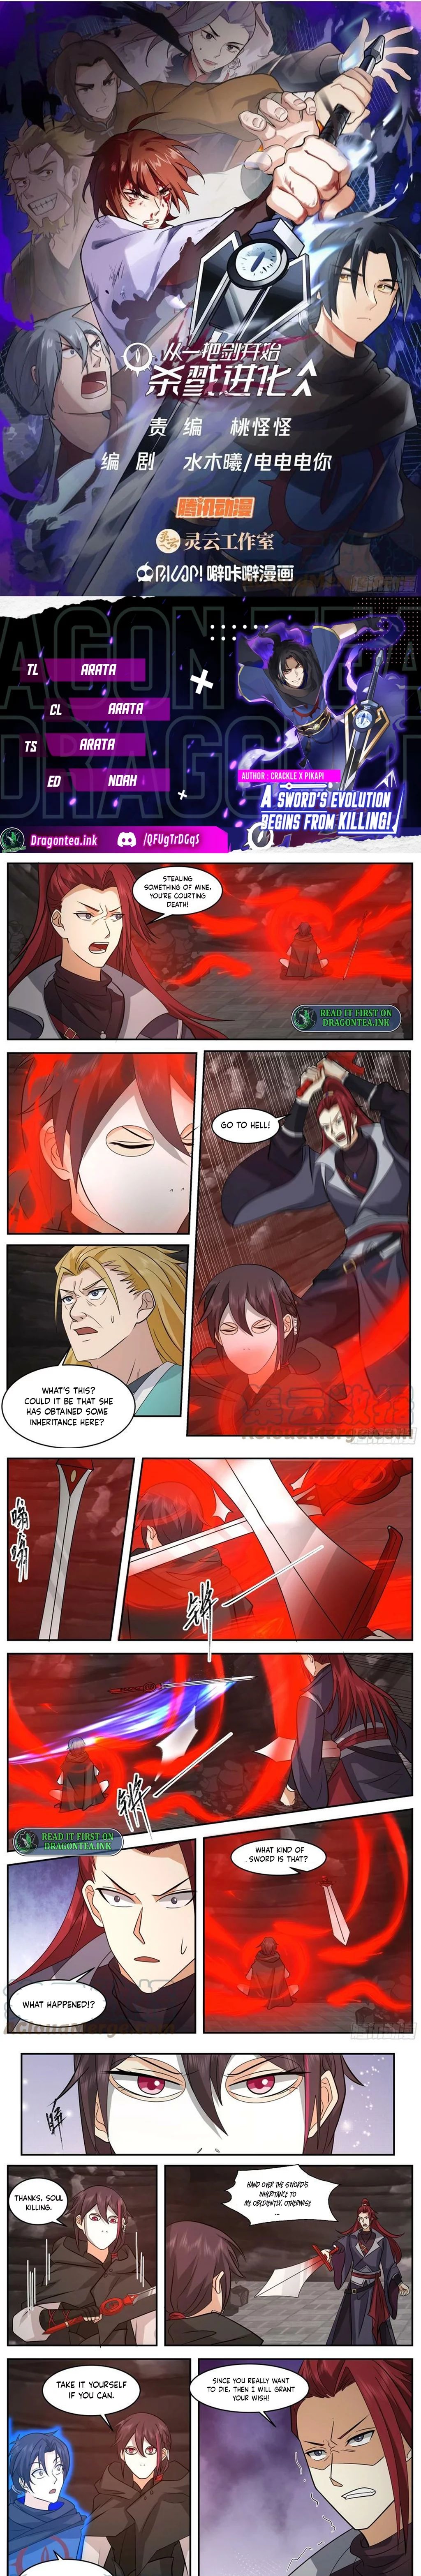 Killing Evolution From A Sword - Page 1